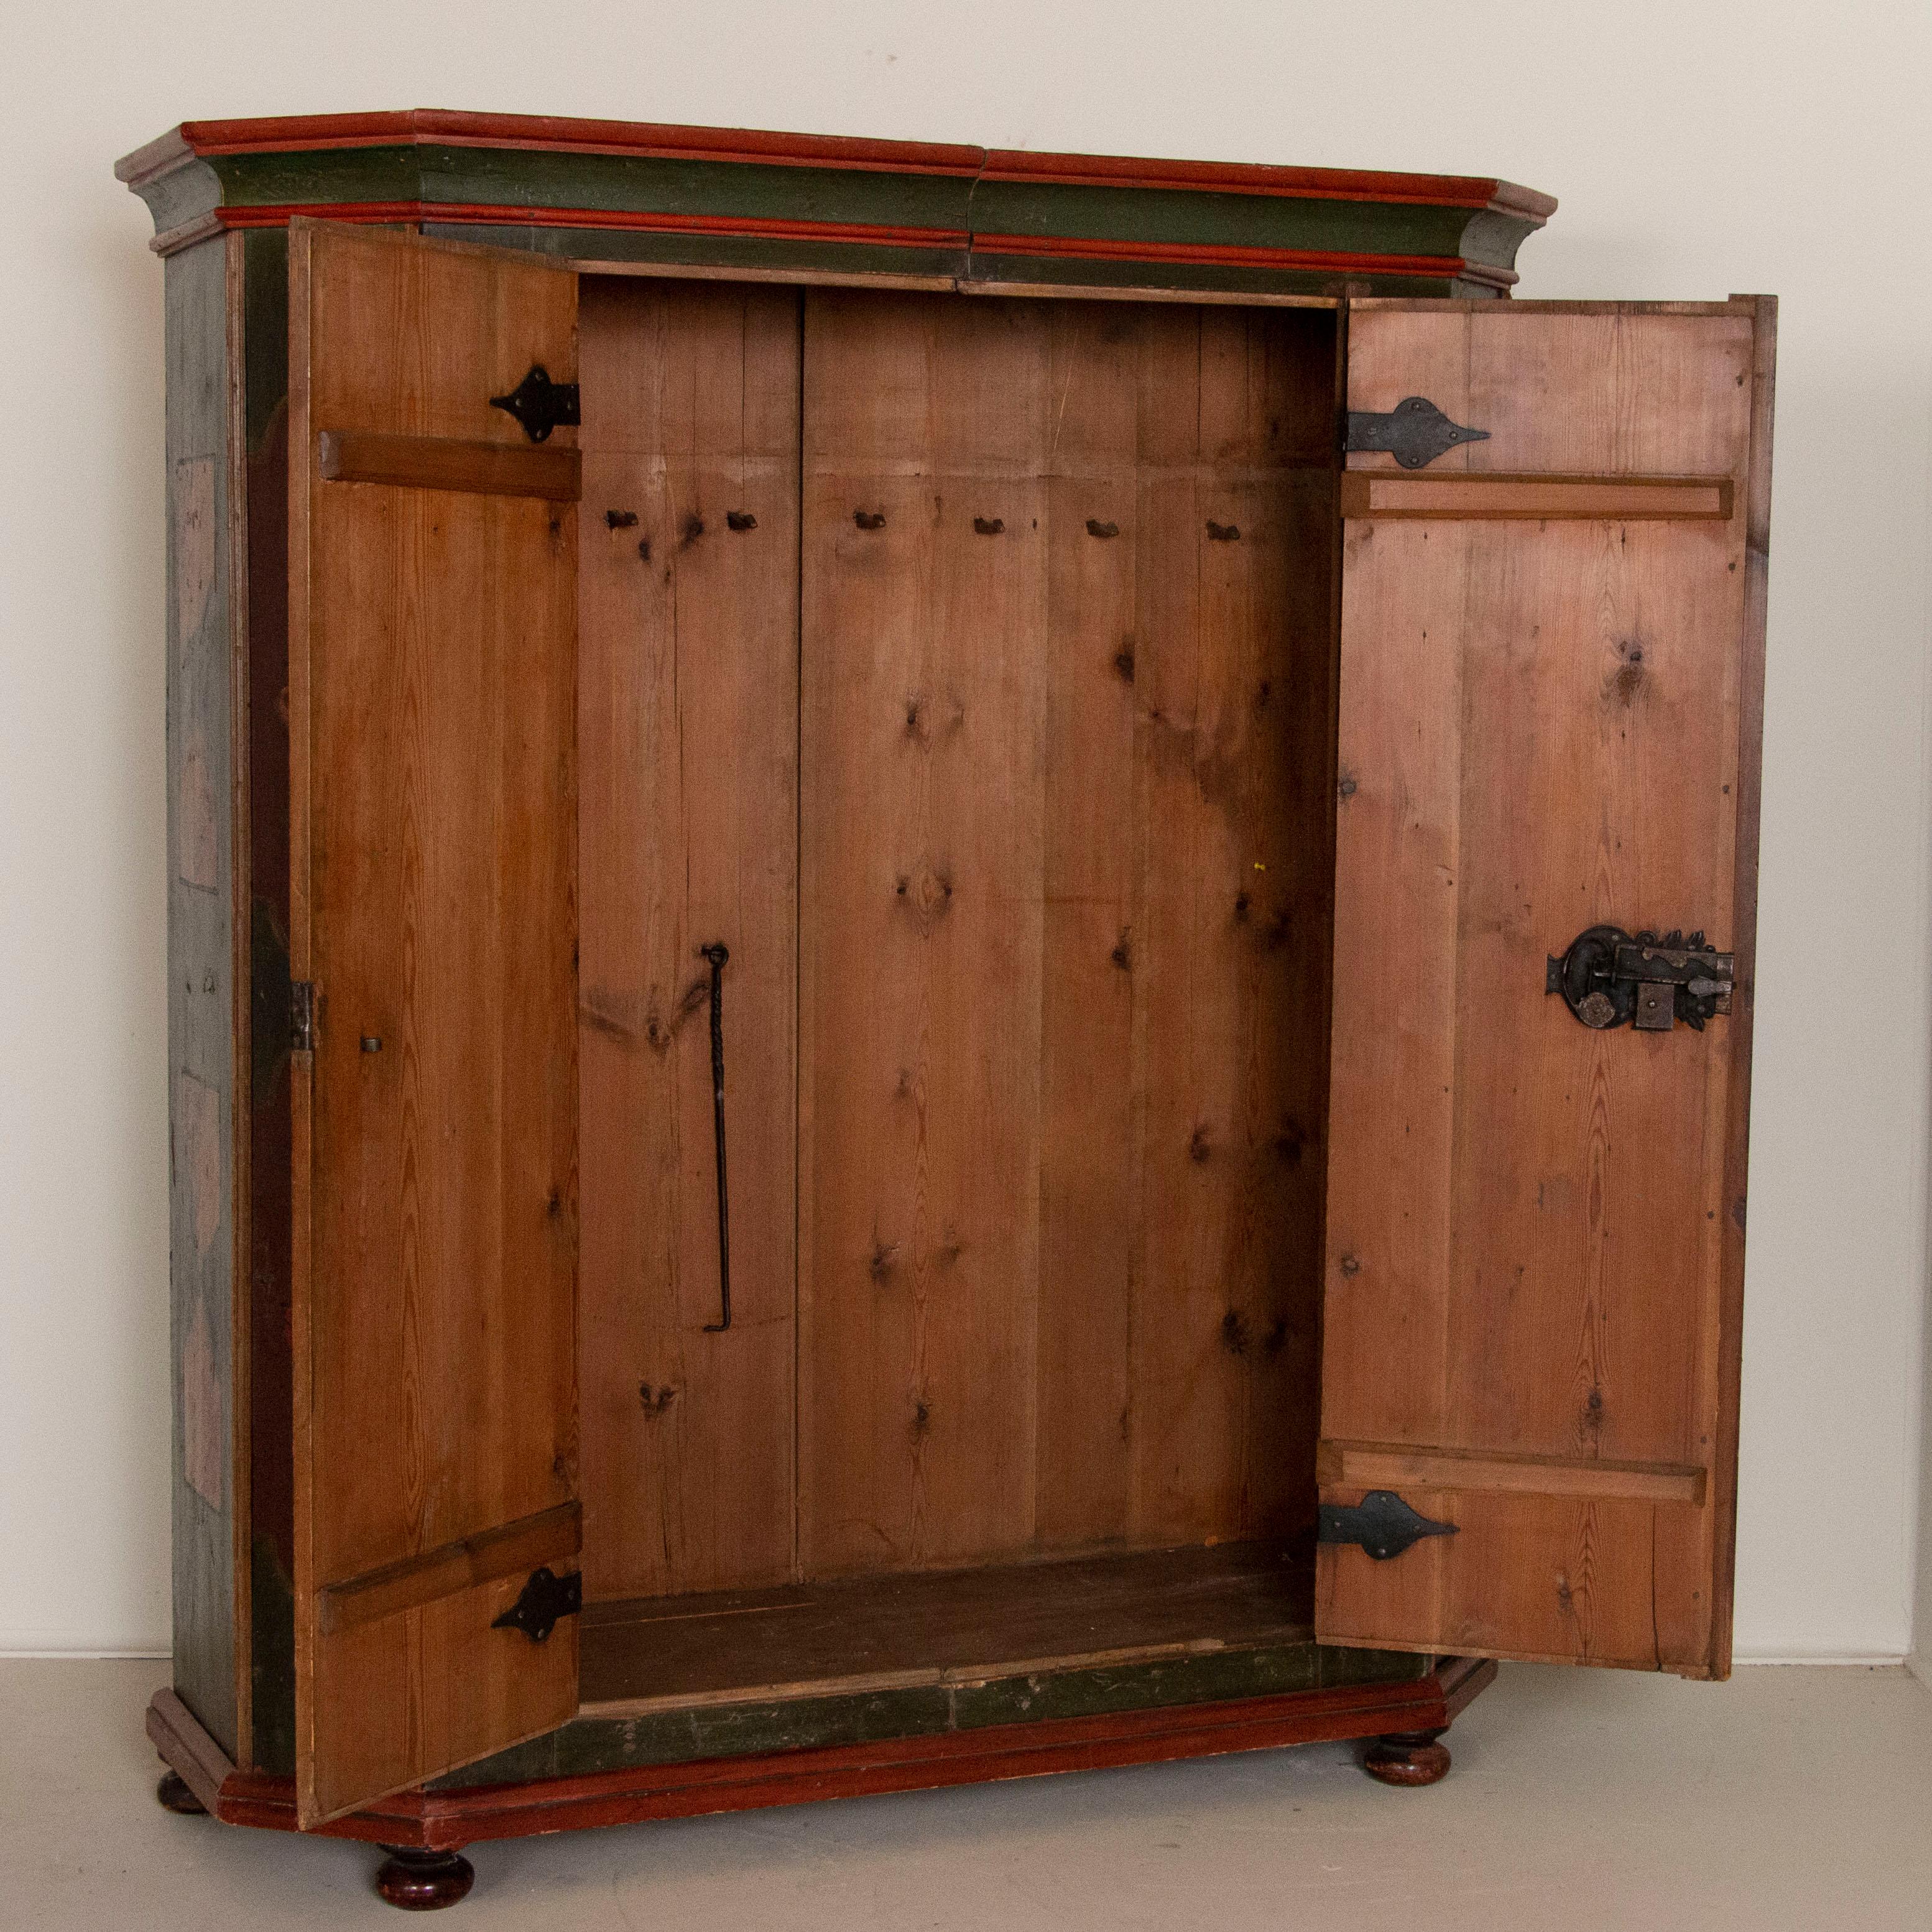 The date of 1790 speaks to the remarkable age of this beautiful armoire, while the original green and red paint has deepened and grown richer over time. Even the natural pine interior has deepened to a rich patina, reflective of the passage of many